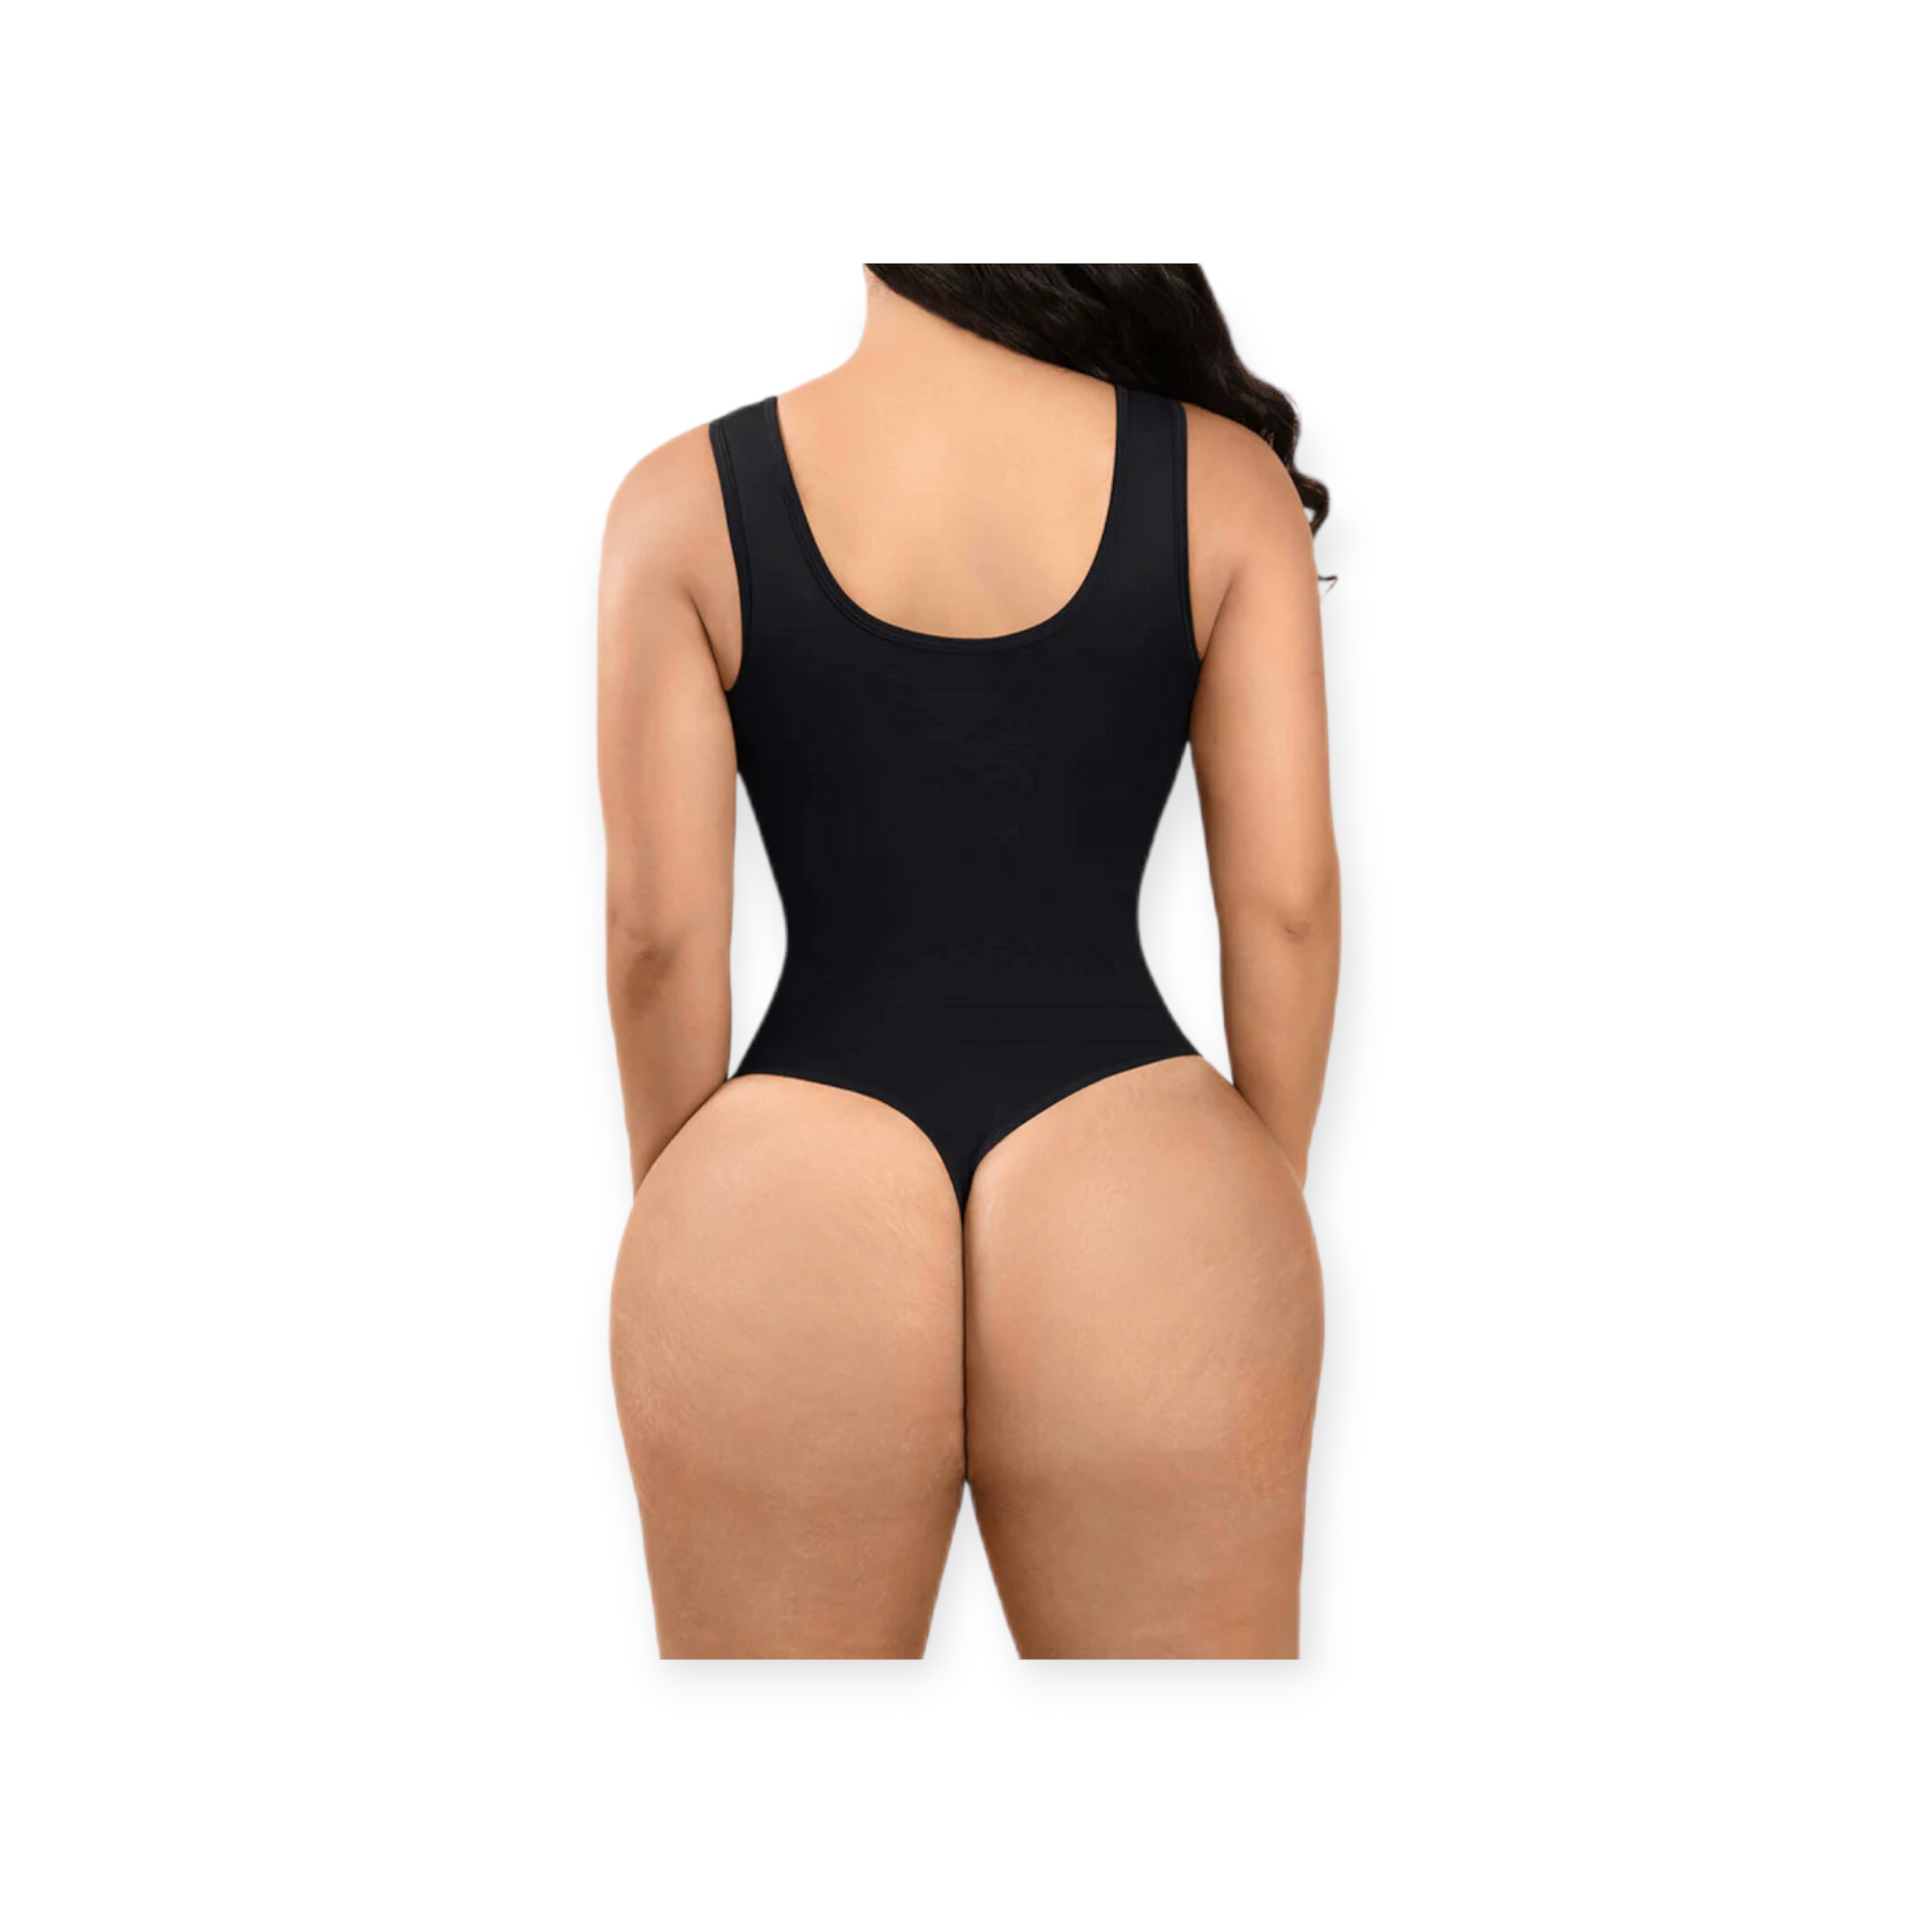 Tank Top Thong Bodysuit – Cinched